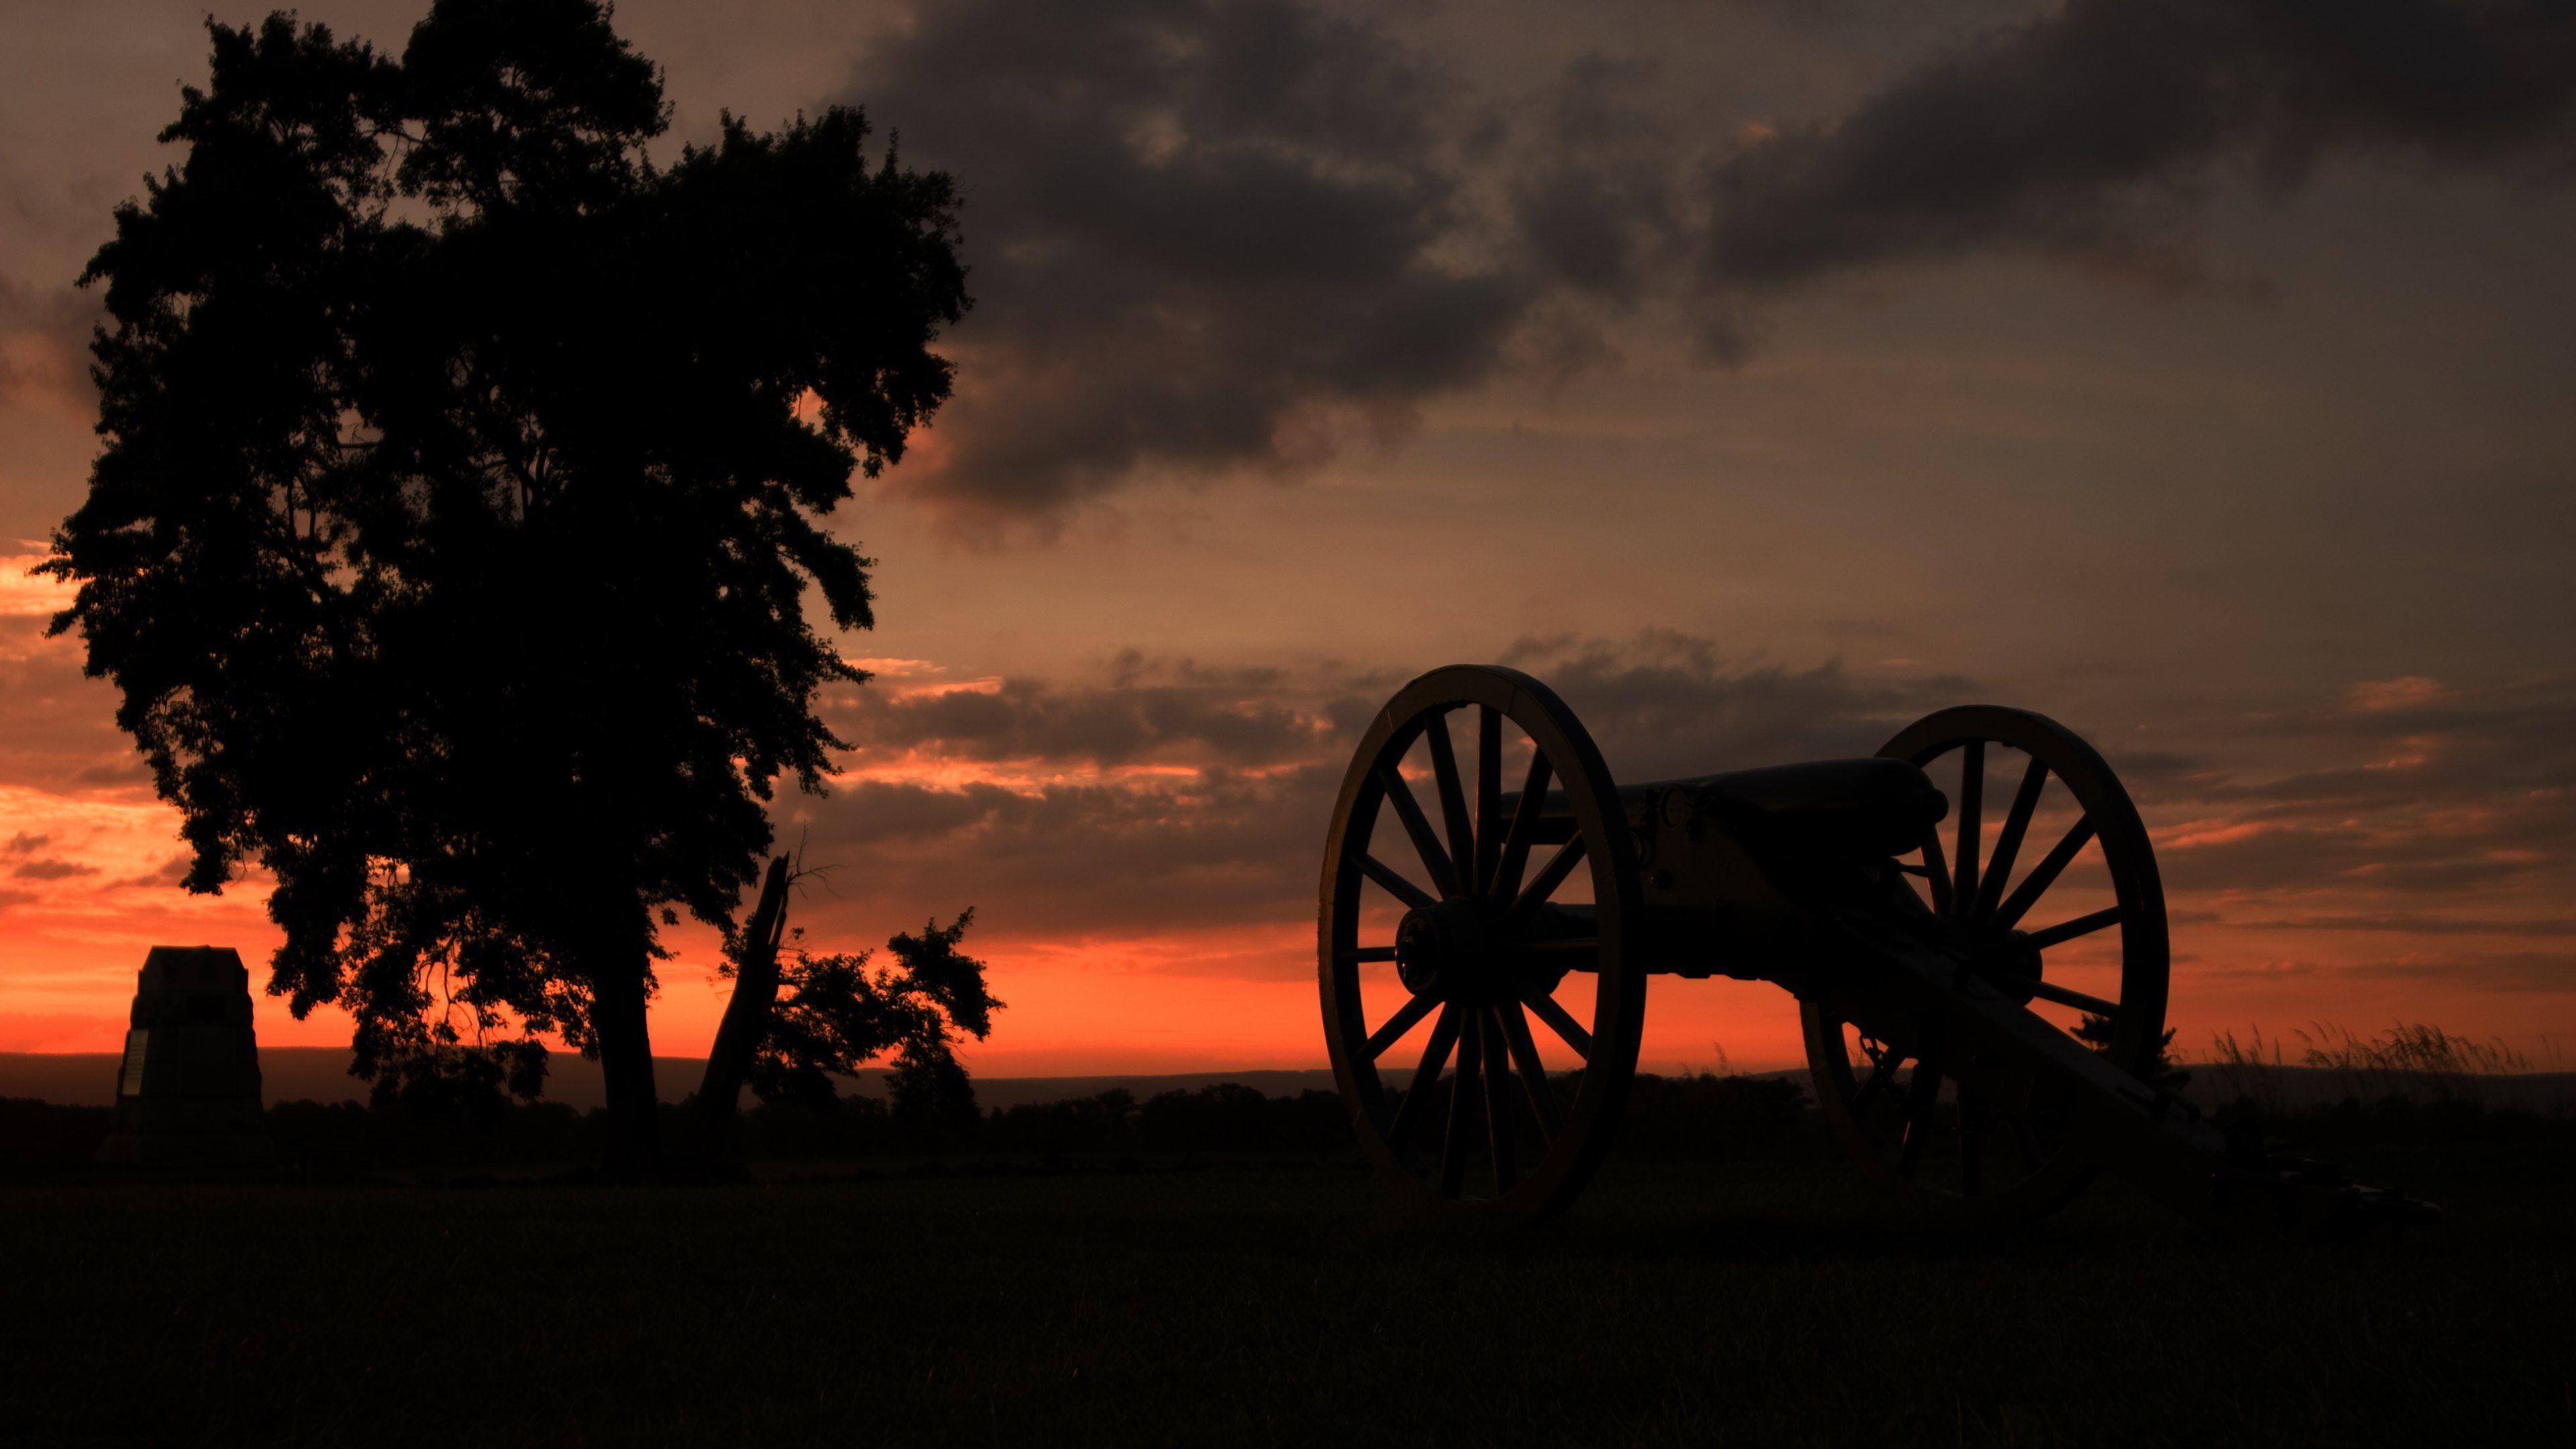 Gettysburg: An American Civil War cannon, Battlefield in the US state of Pennsylvania, Army of the Potomac. 3840x2160 4K Background.